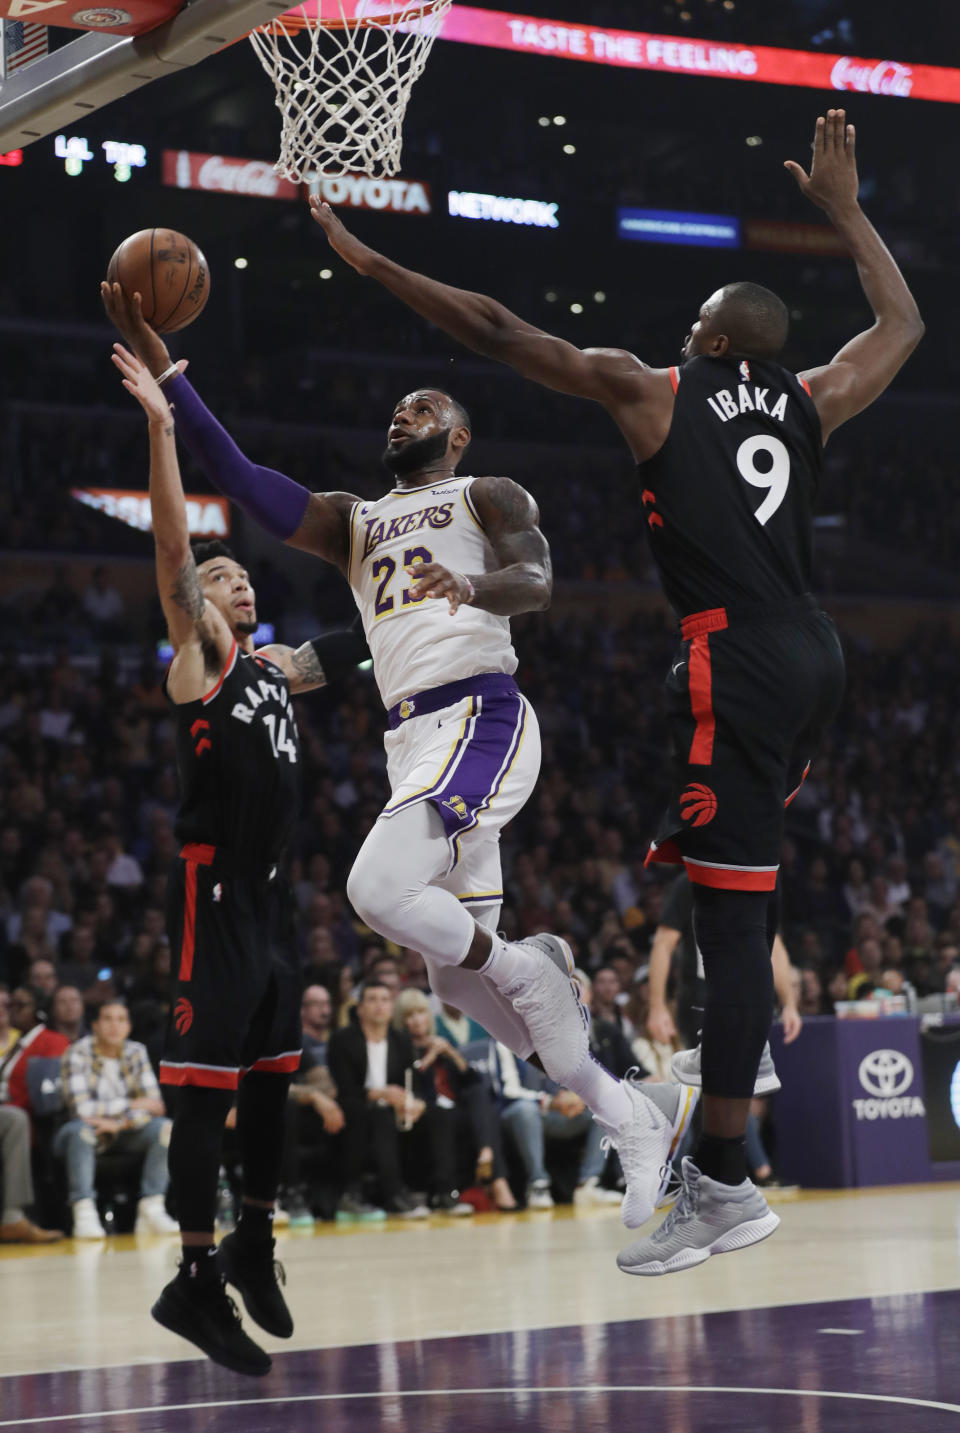 Los Angeles Lakers' LeBron James (23) drives to the basket between Toronto Raptors' Serge Ibaka (9) and Danny Green (14) during the first half of an NBA basketball game Sunday, Nov. 4, 2018, in Los Angeles. (AP Photo/Marcio Jose Sanchez)